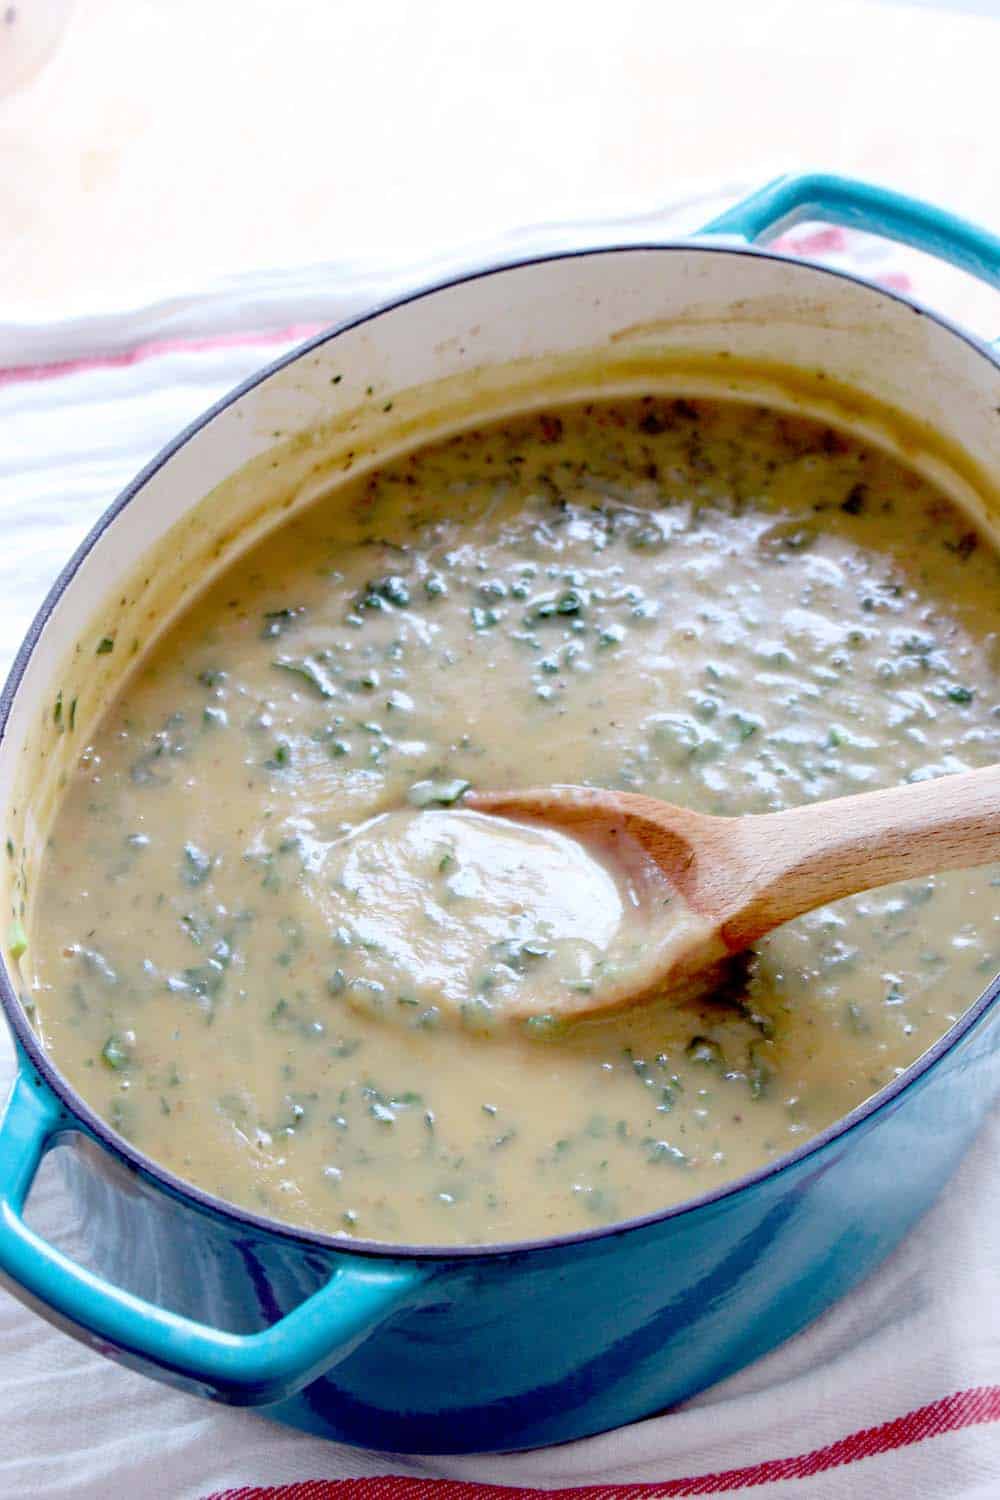 Dutch oven filled with creamy soup, with a wooden spoon perched inside.